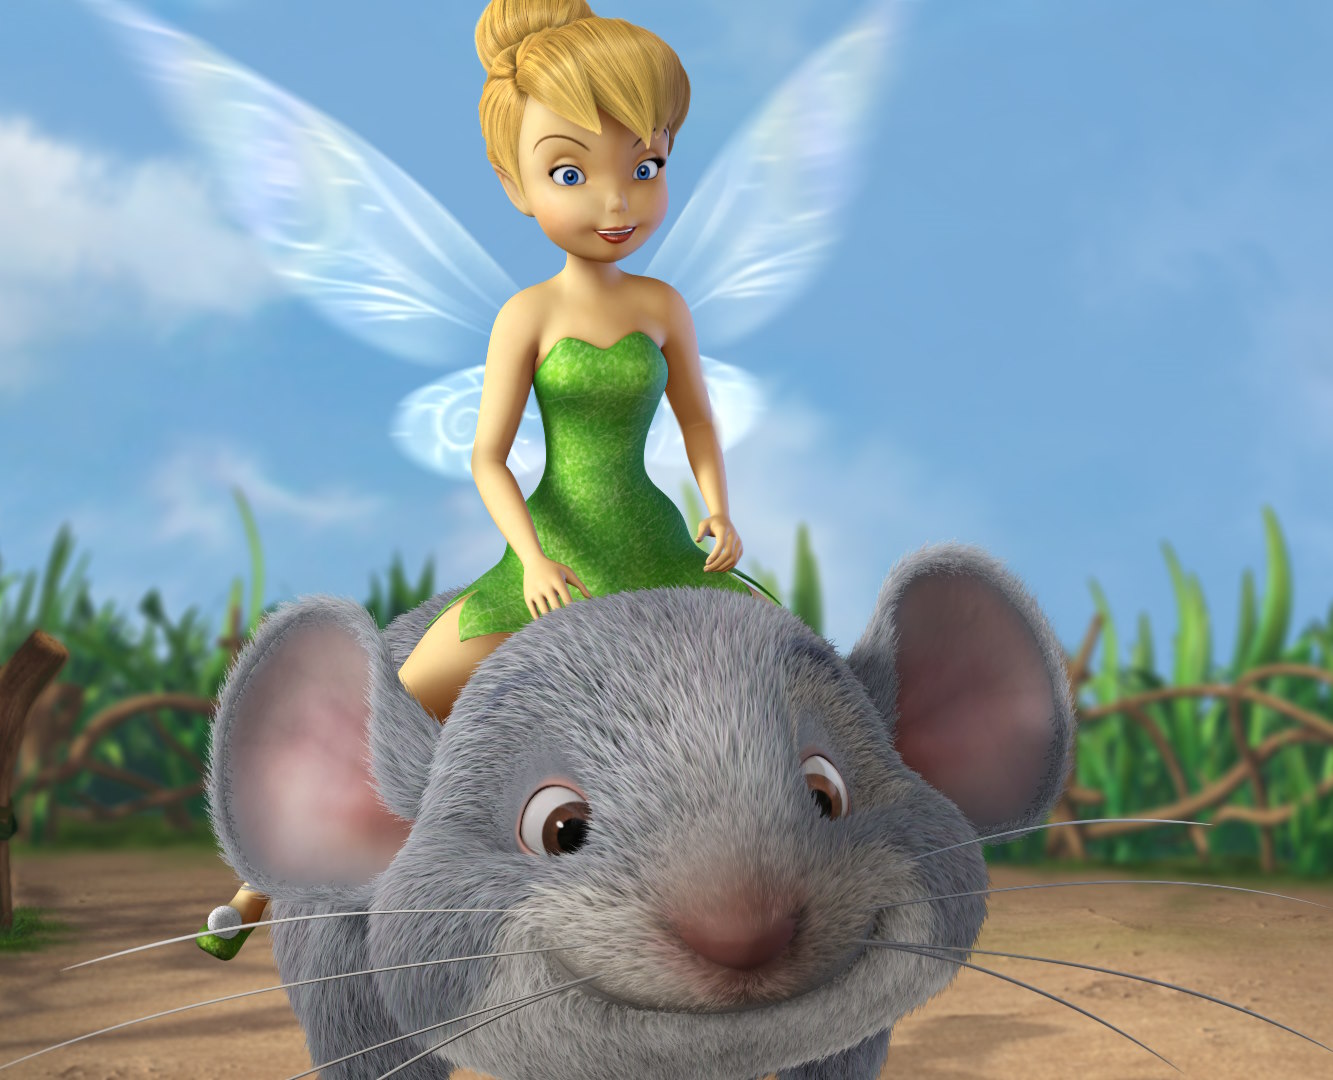 The fairy Tinker Bell rides a mouse